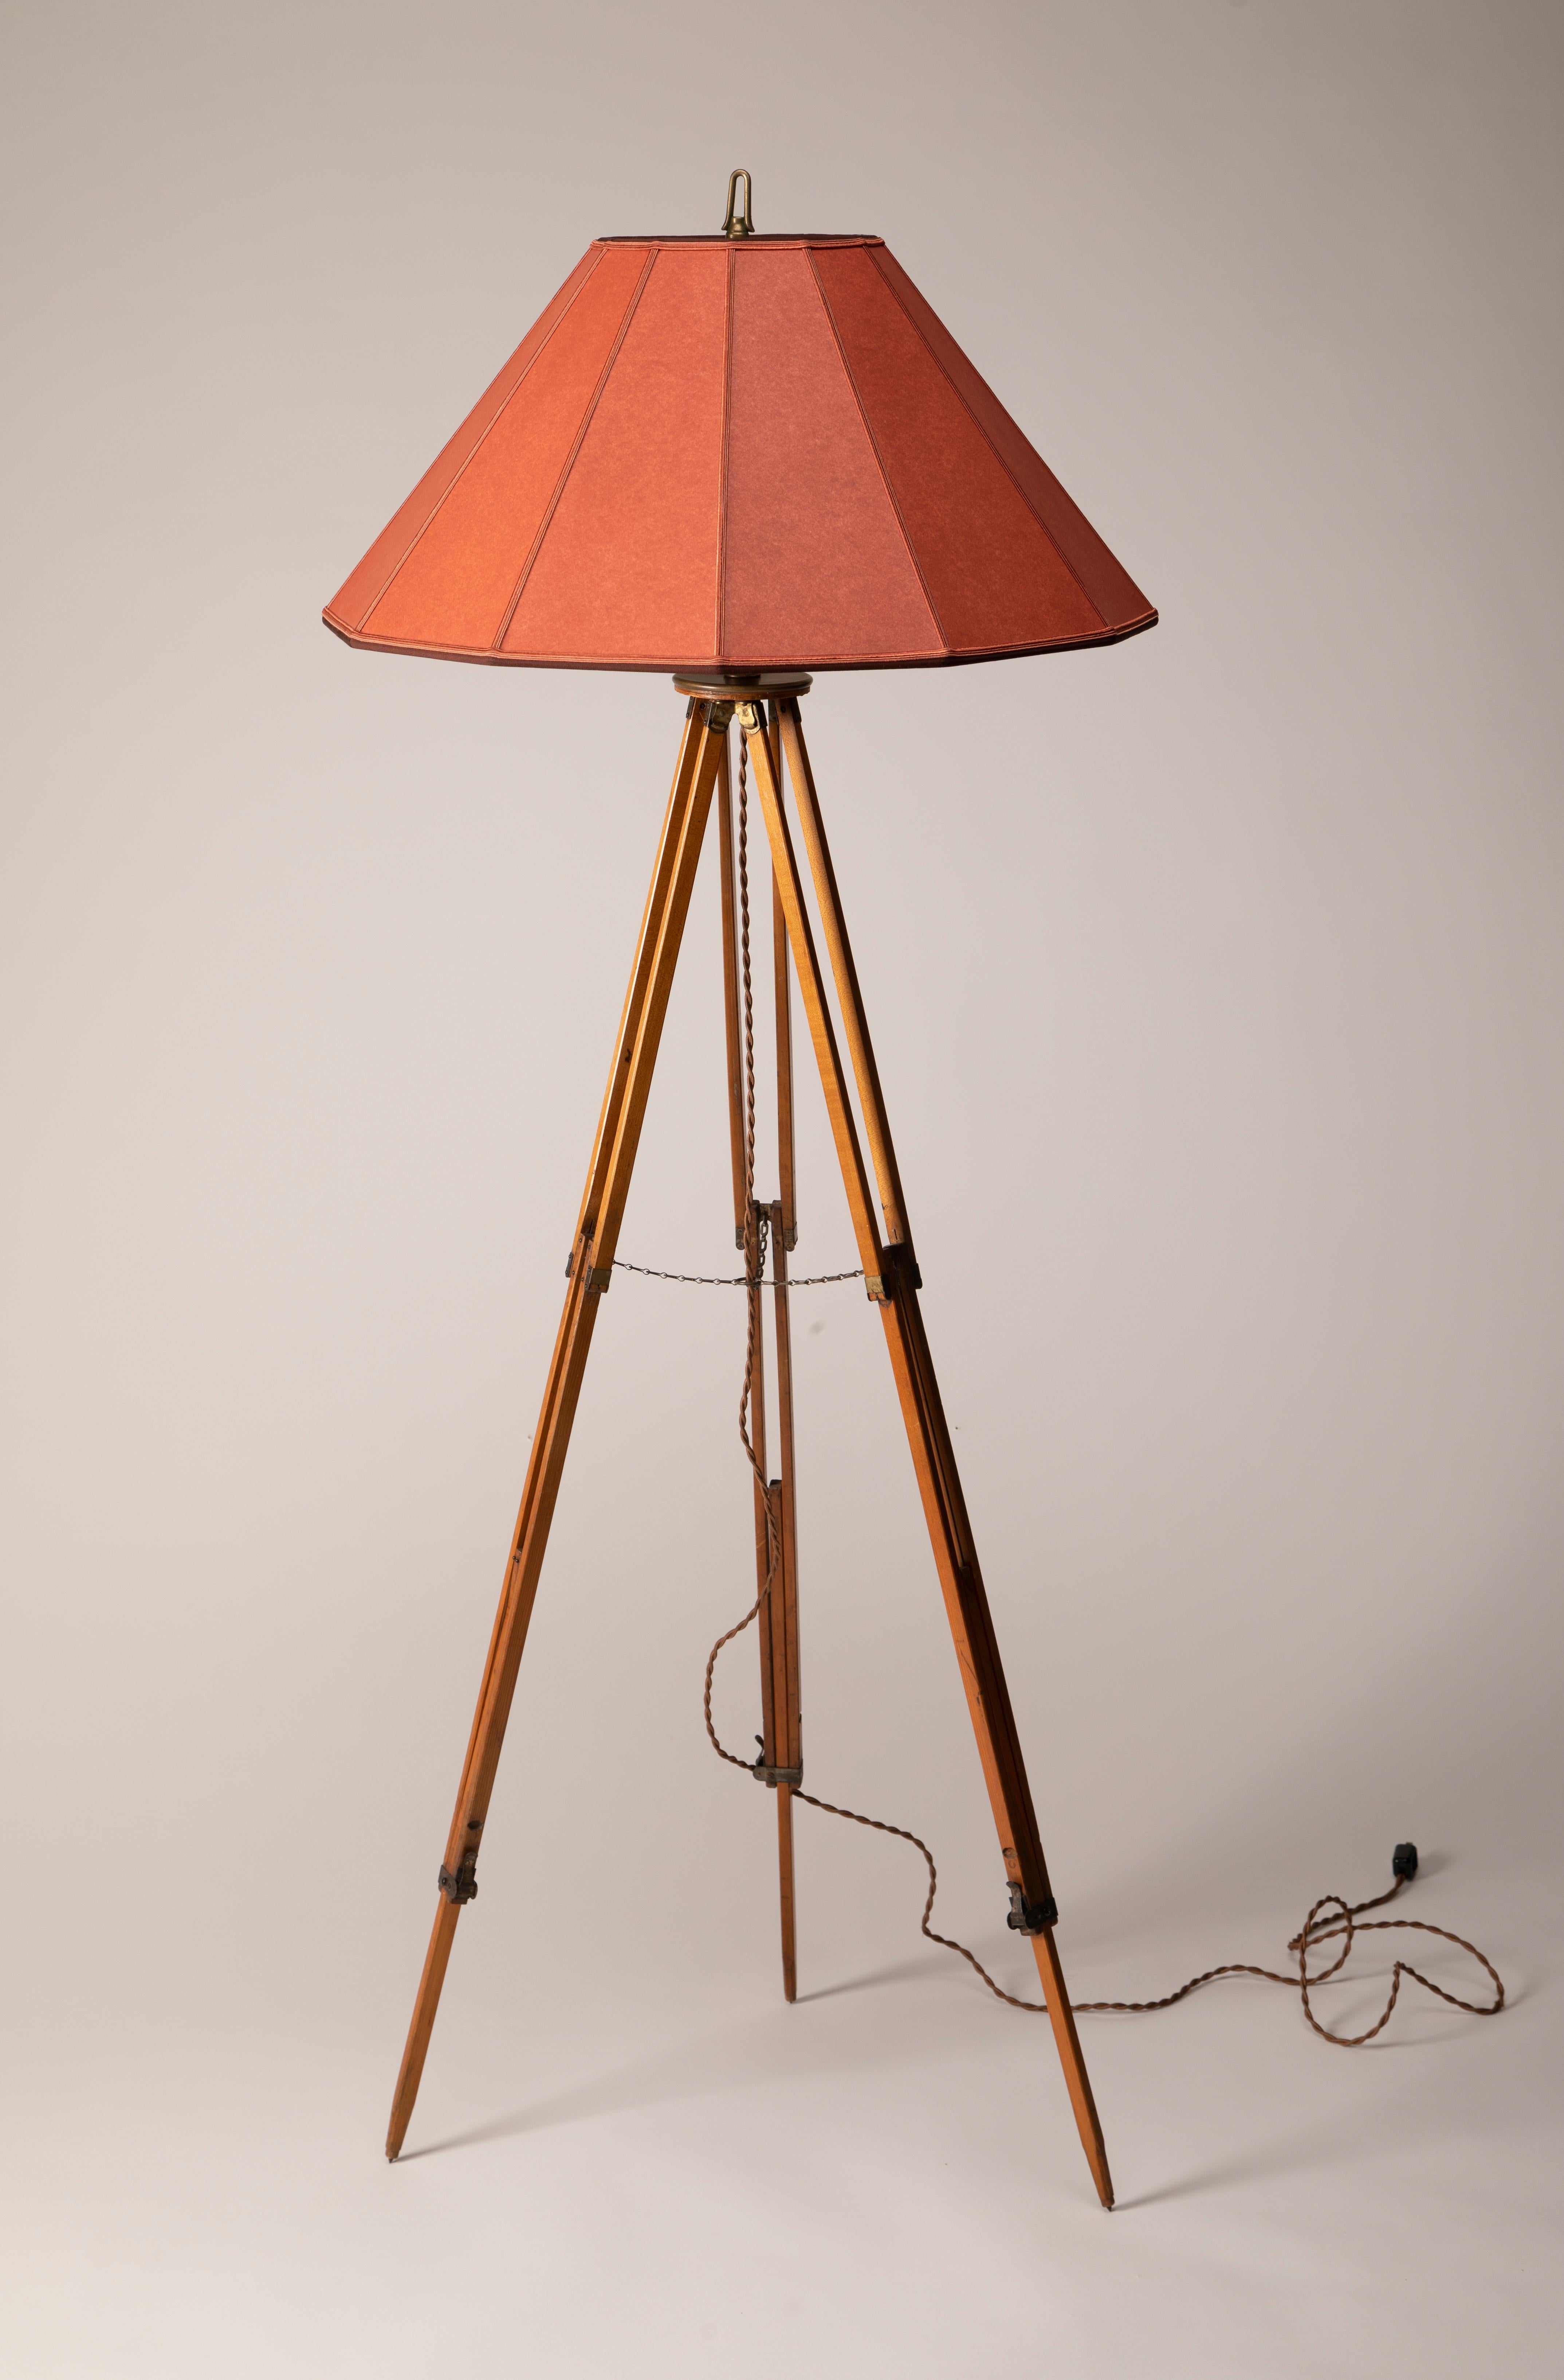 Tripod Floor Lamp
Wooden Tripod 1920’s repurposed into floor lamp
Custom Parchment Shade
Lampshade is 24